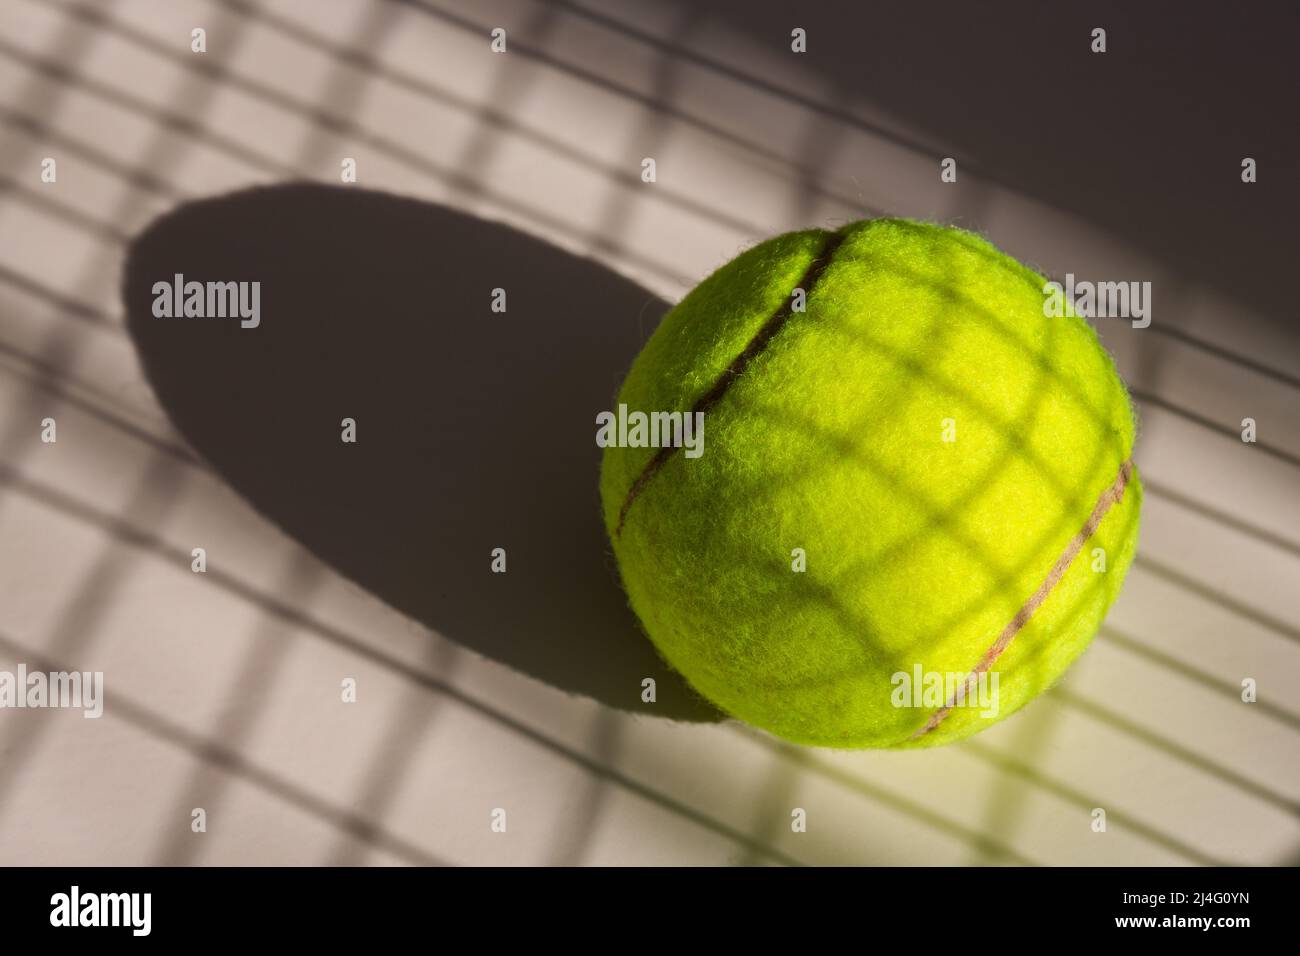 Tennis ball and its shadow on an isolated white background. Tennis ball has shadow of tennis racket net on it. Stock Photo